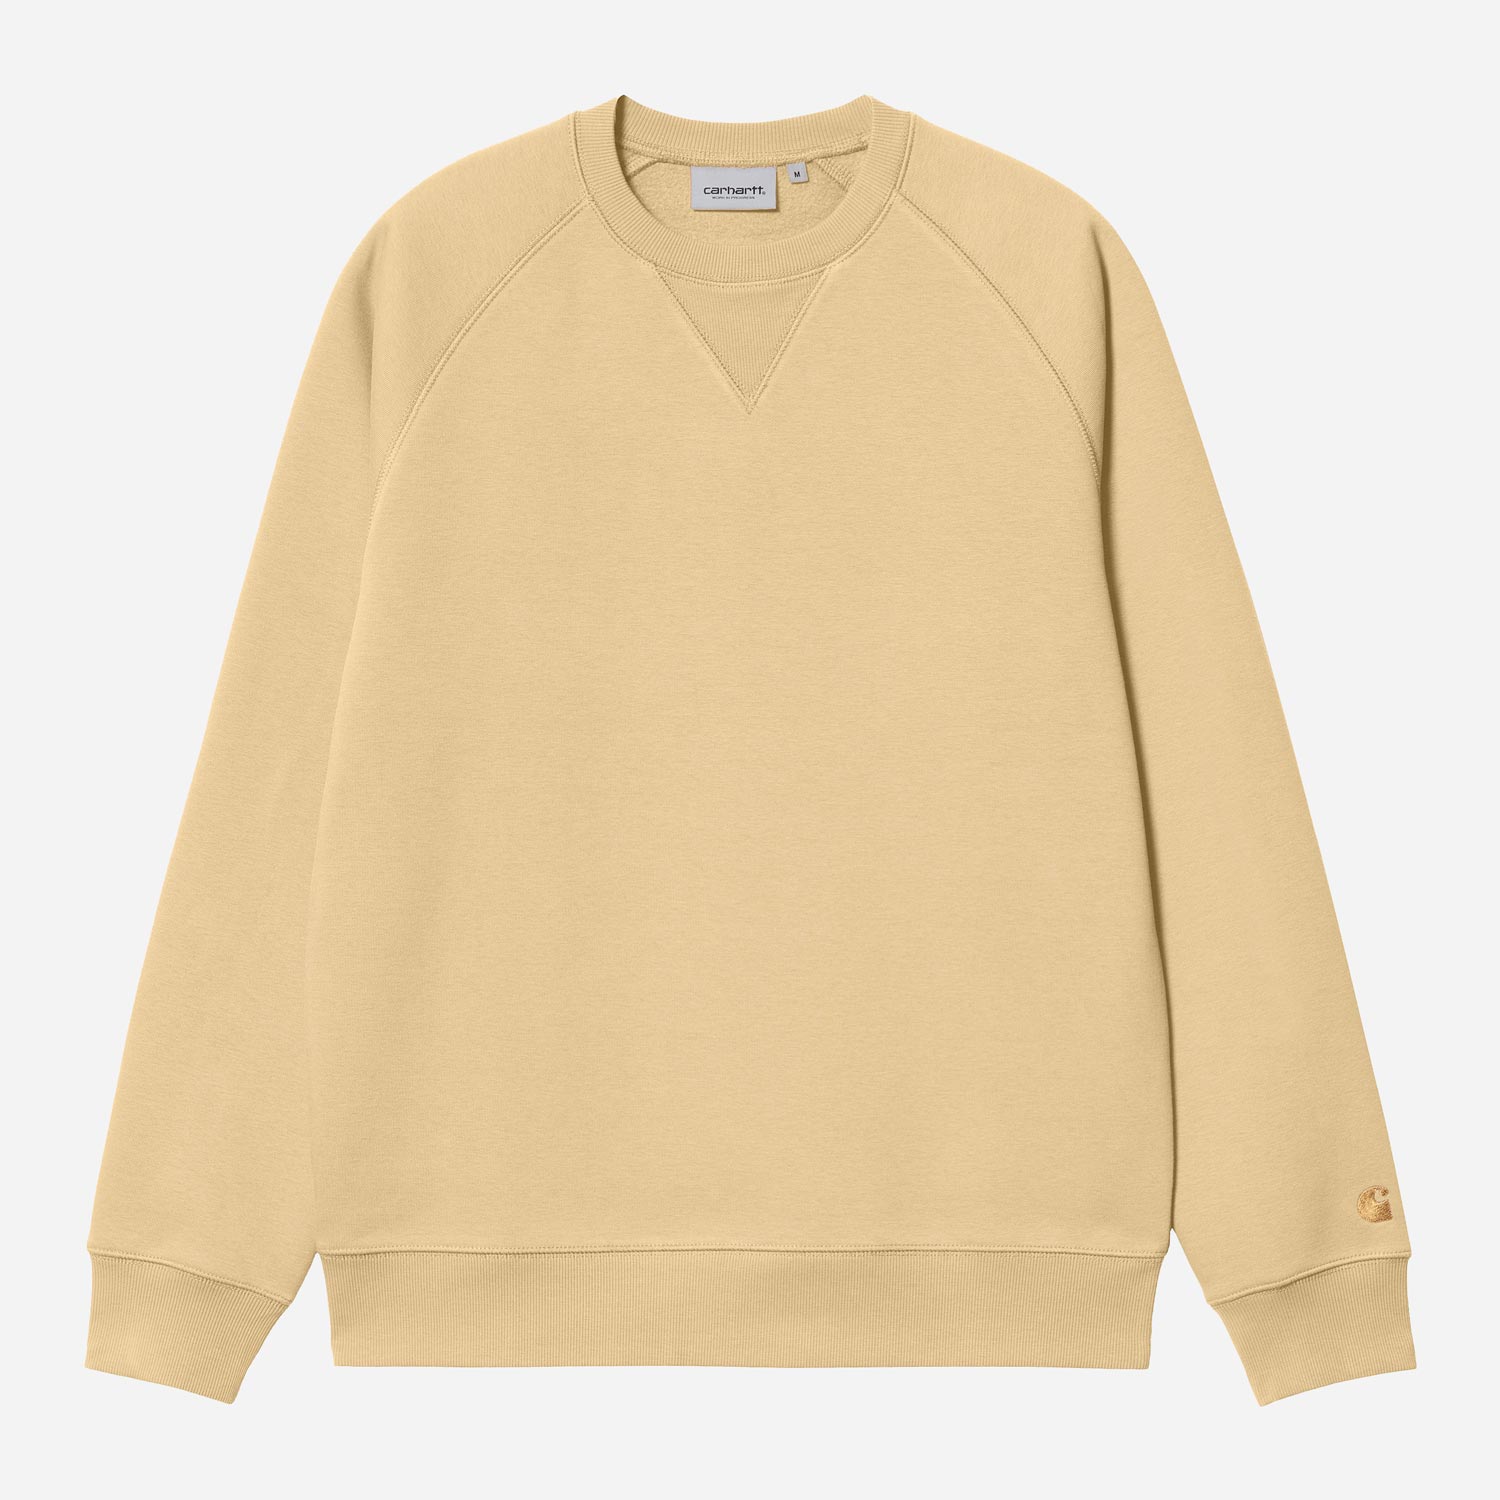 Carhartt WIP Regular Fit Chase Sweat - Citron/Gold